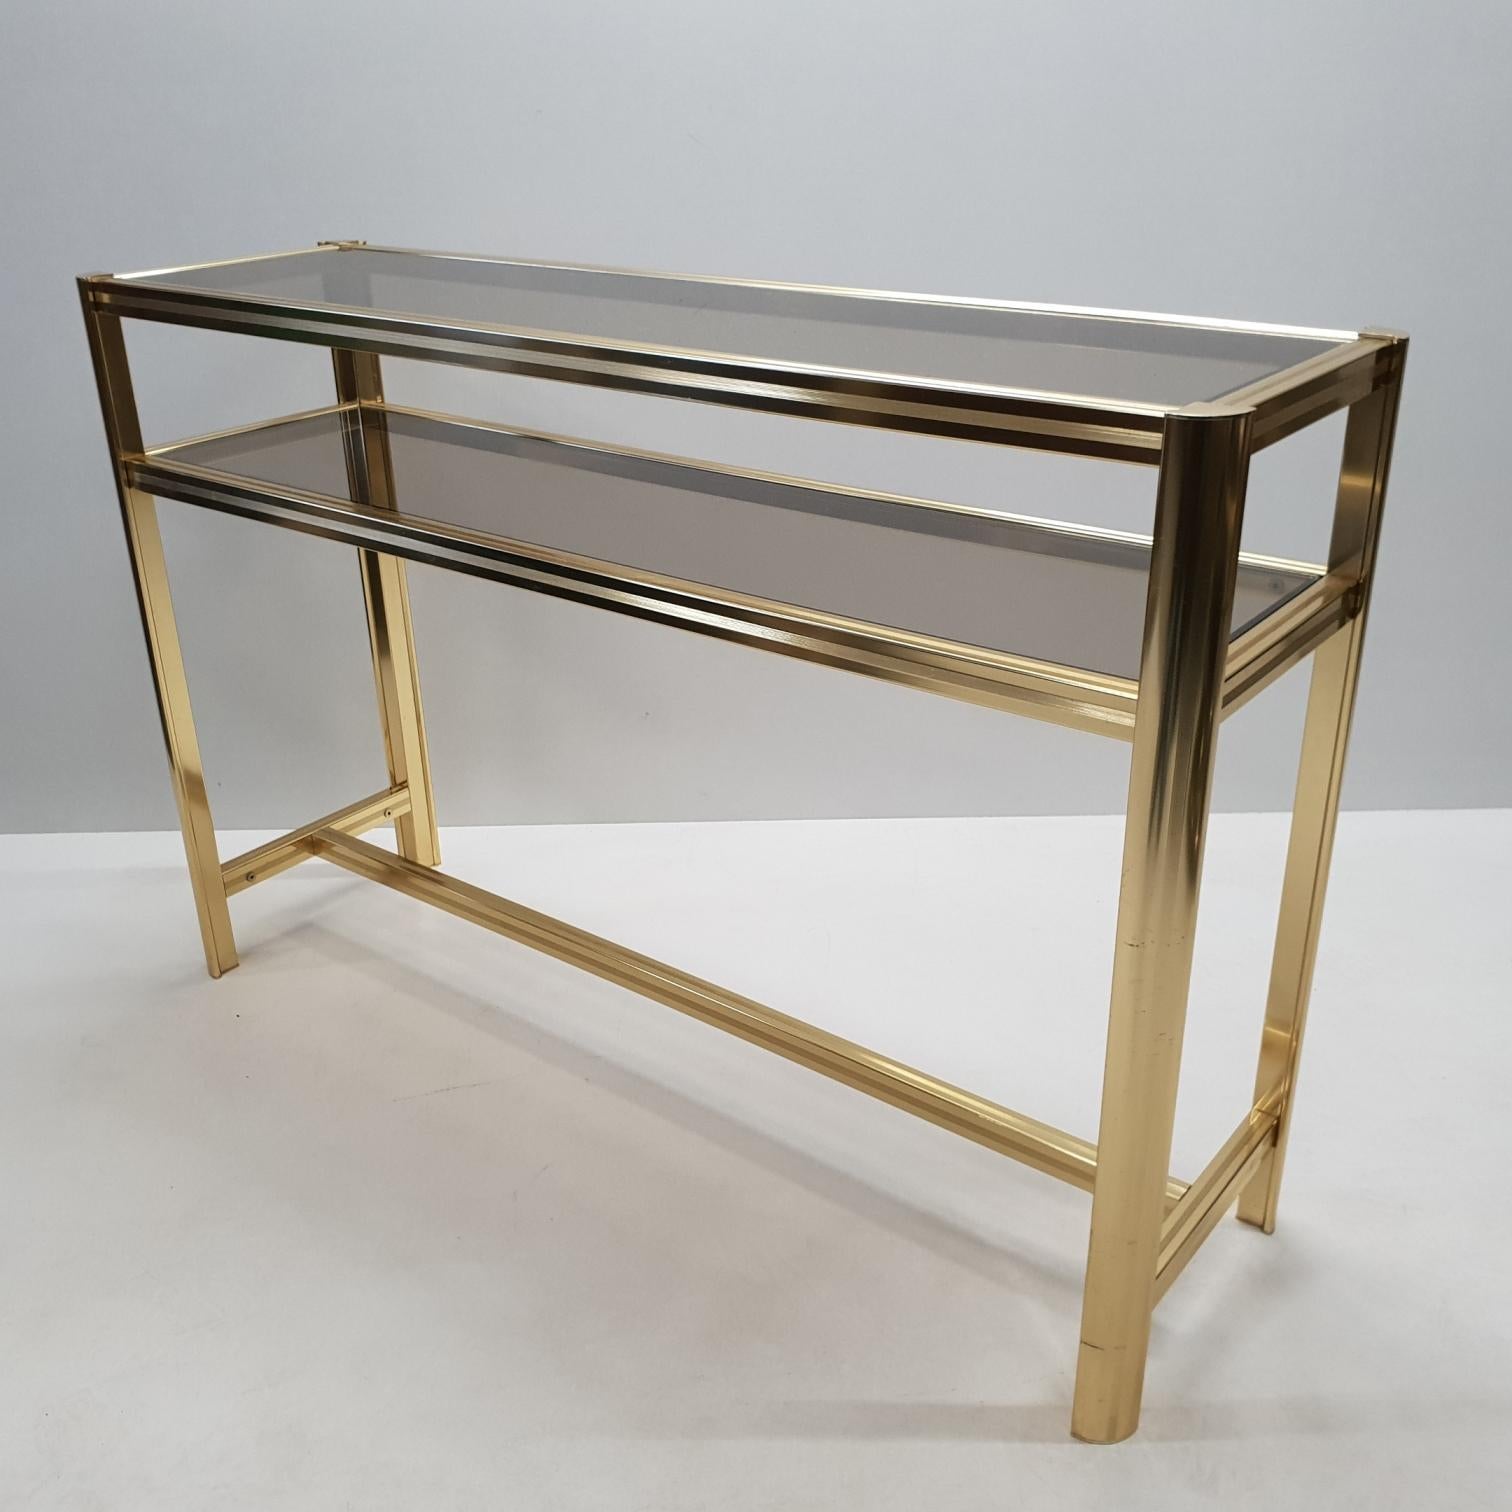 Italian Modern Gilt Brass Two Tiers Side Table with Smoked Glass, 1980s In Excellent Condition For Sale In Valkenswaard, NL